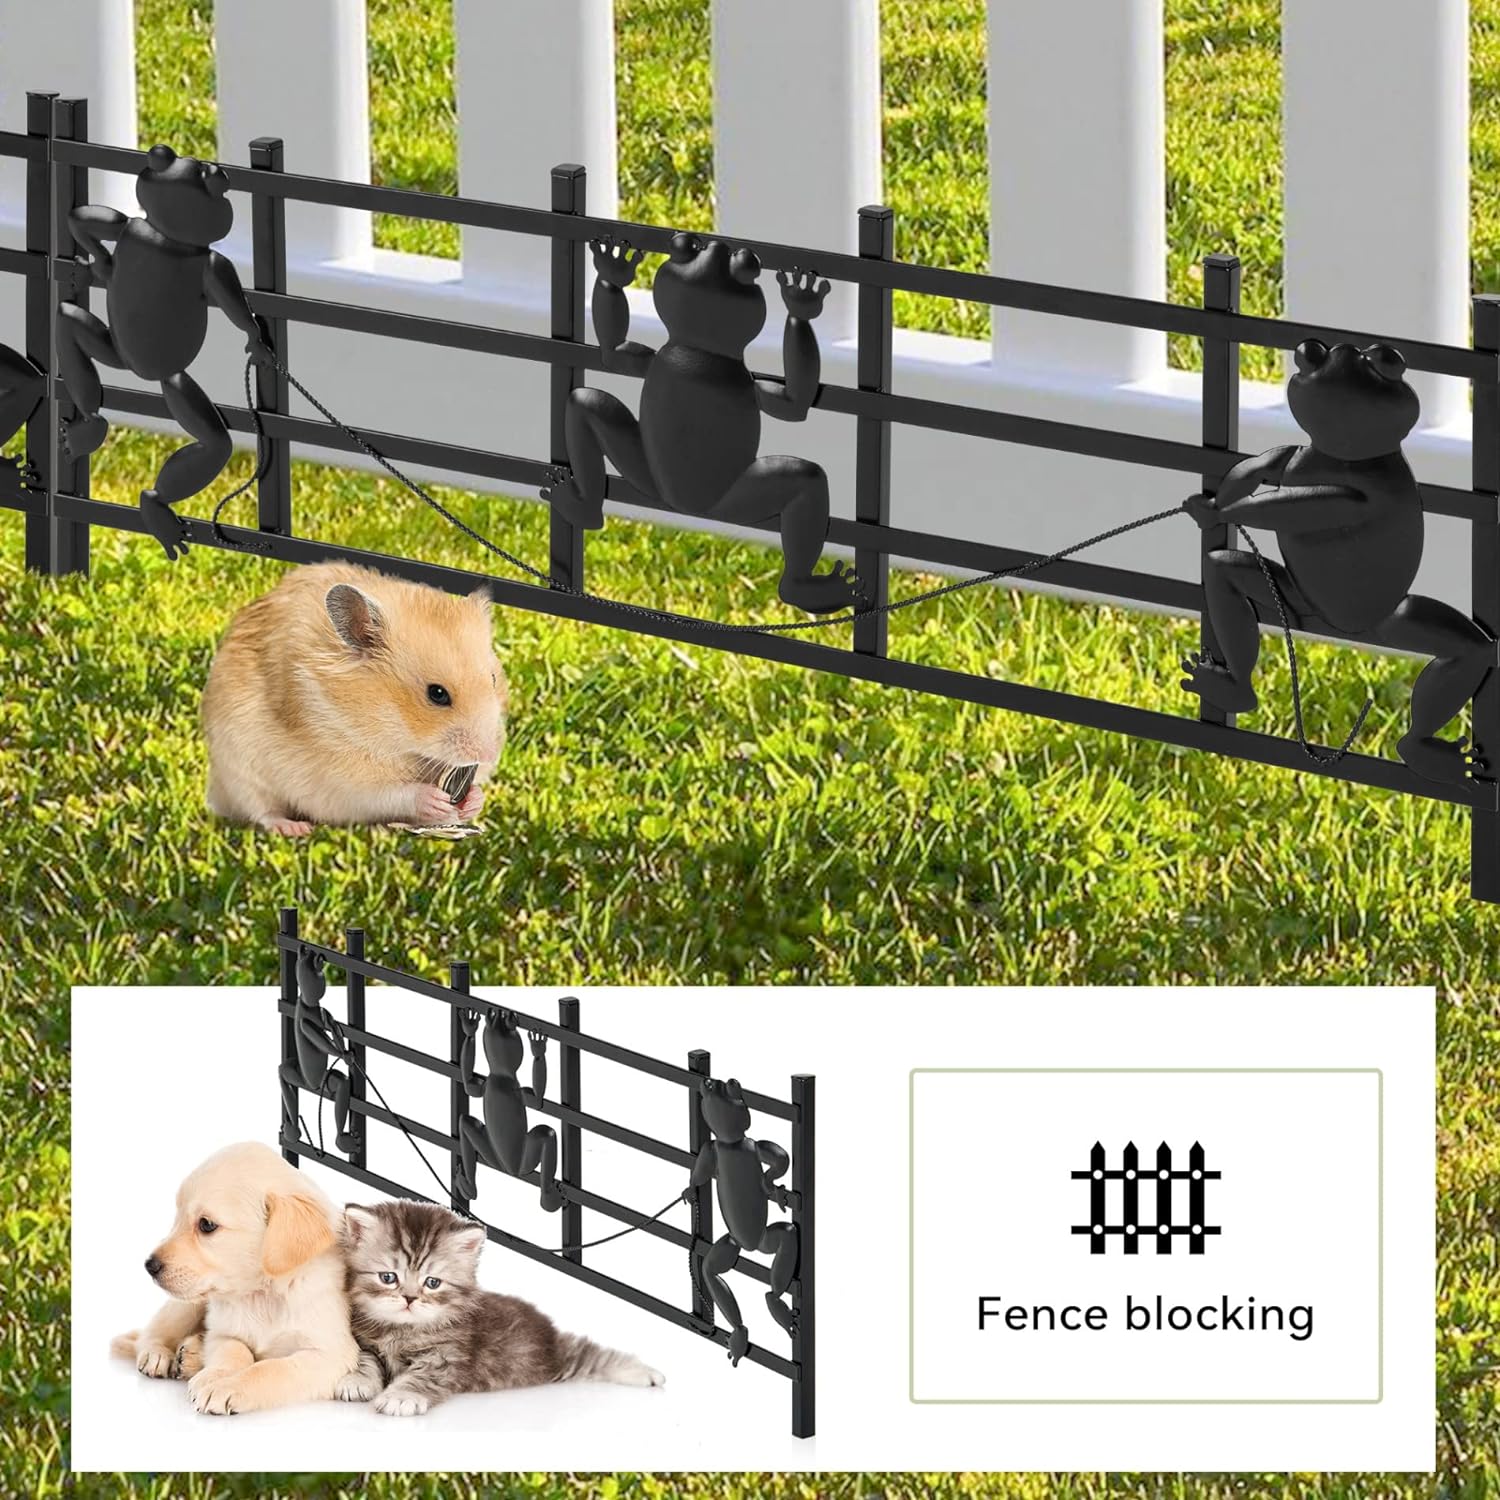 15 Pack Decorative Garden Fence, 8in(H) X 24 in(L) Dog Rabbits Garden Fence, Rustproof Metal Animal Garden Fence Border, Small Animal Barrier Fence for Outdoor Patio (Frog-Black)